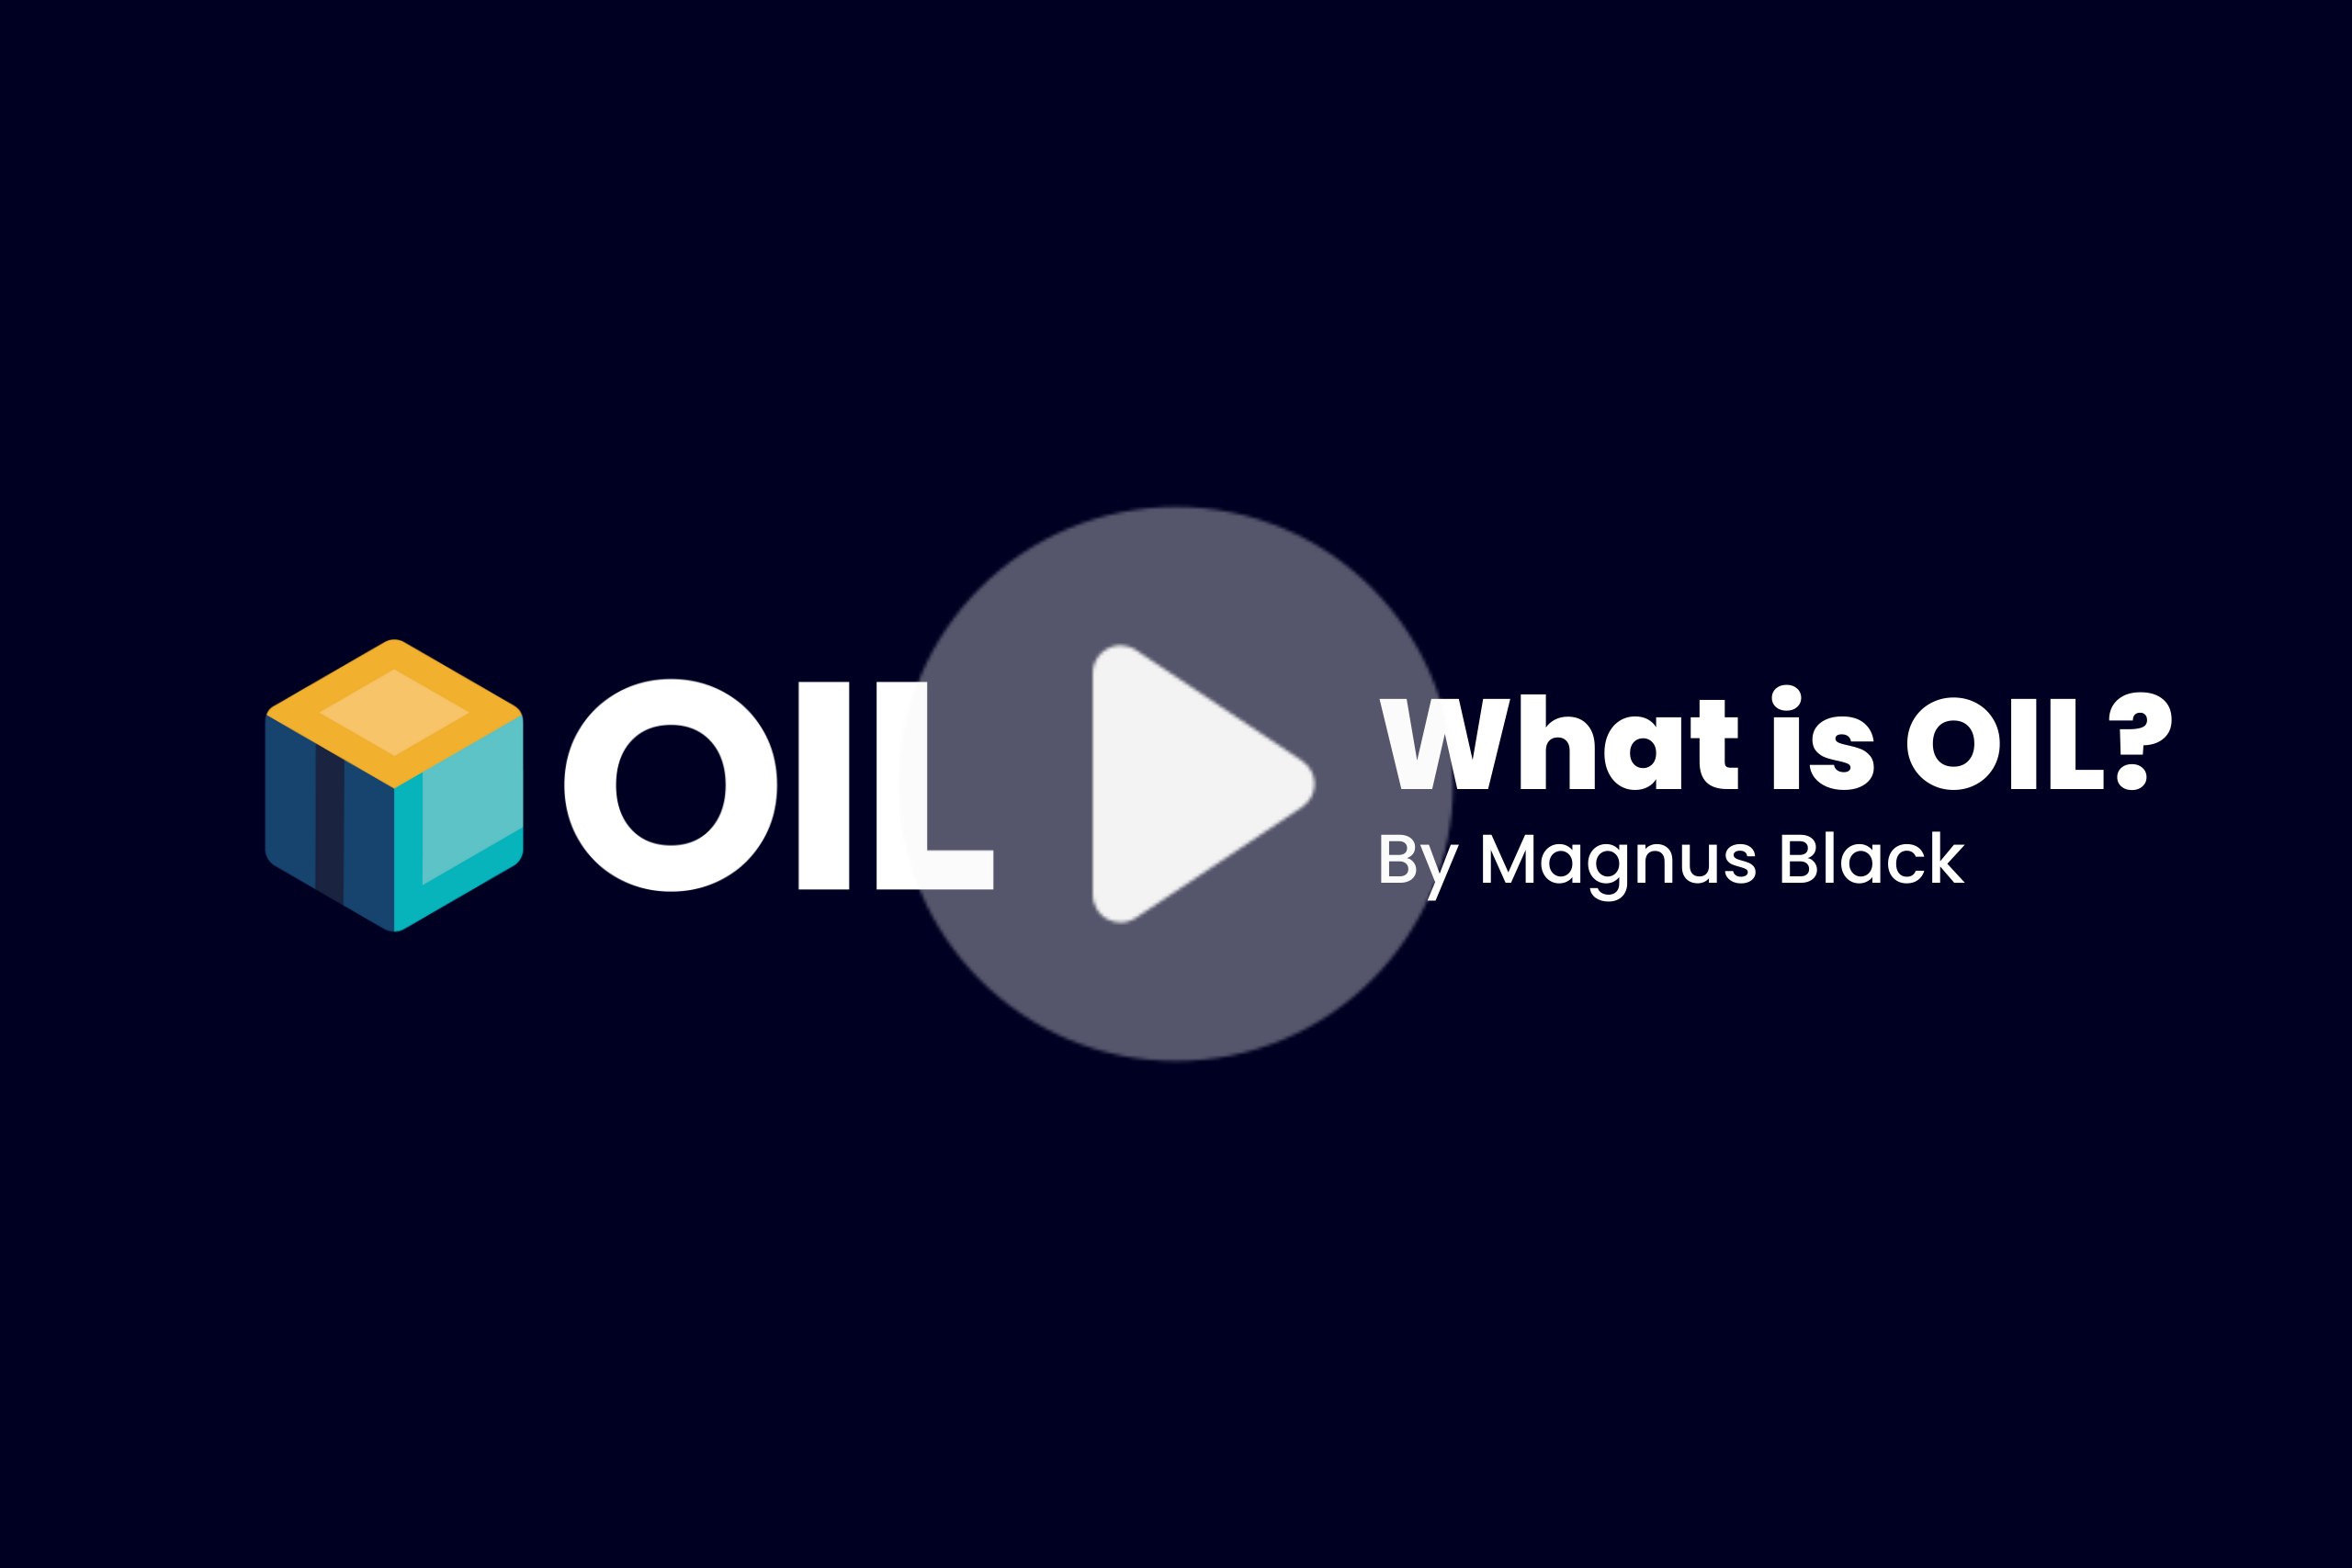 Video: what is OIL?